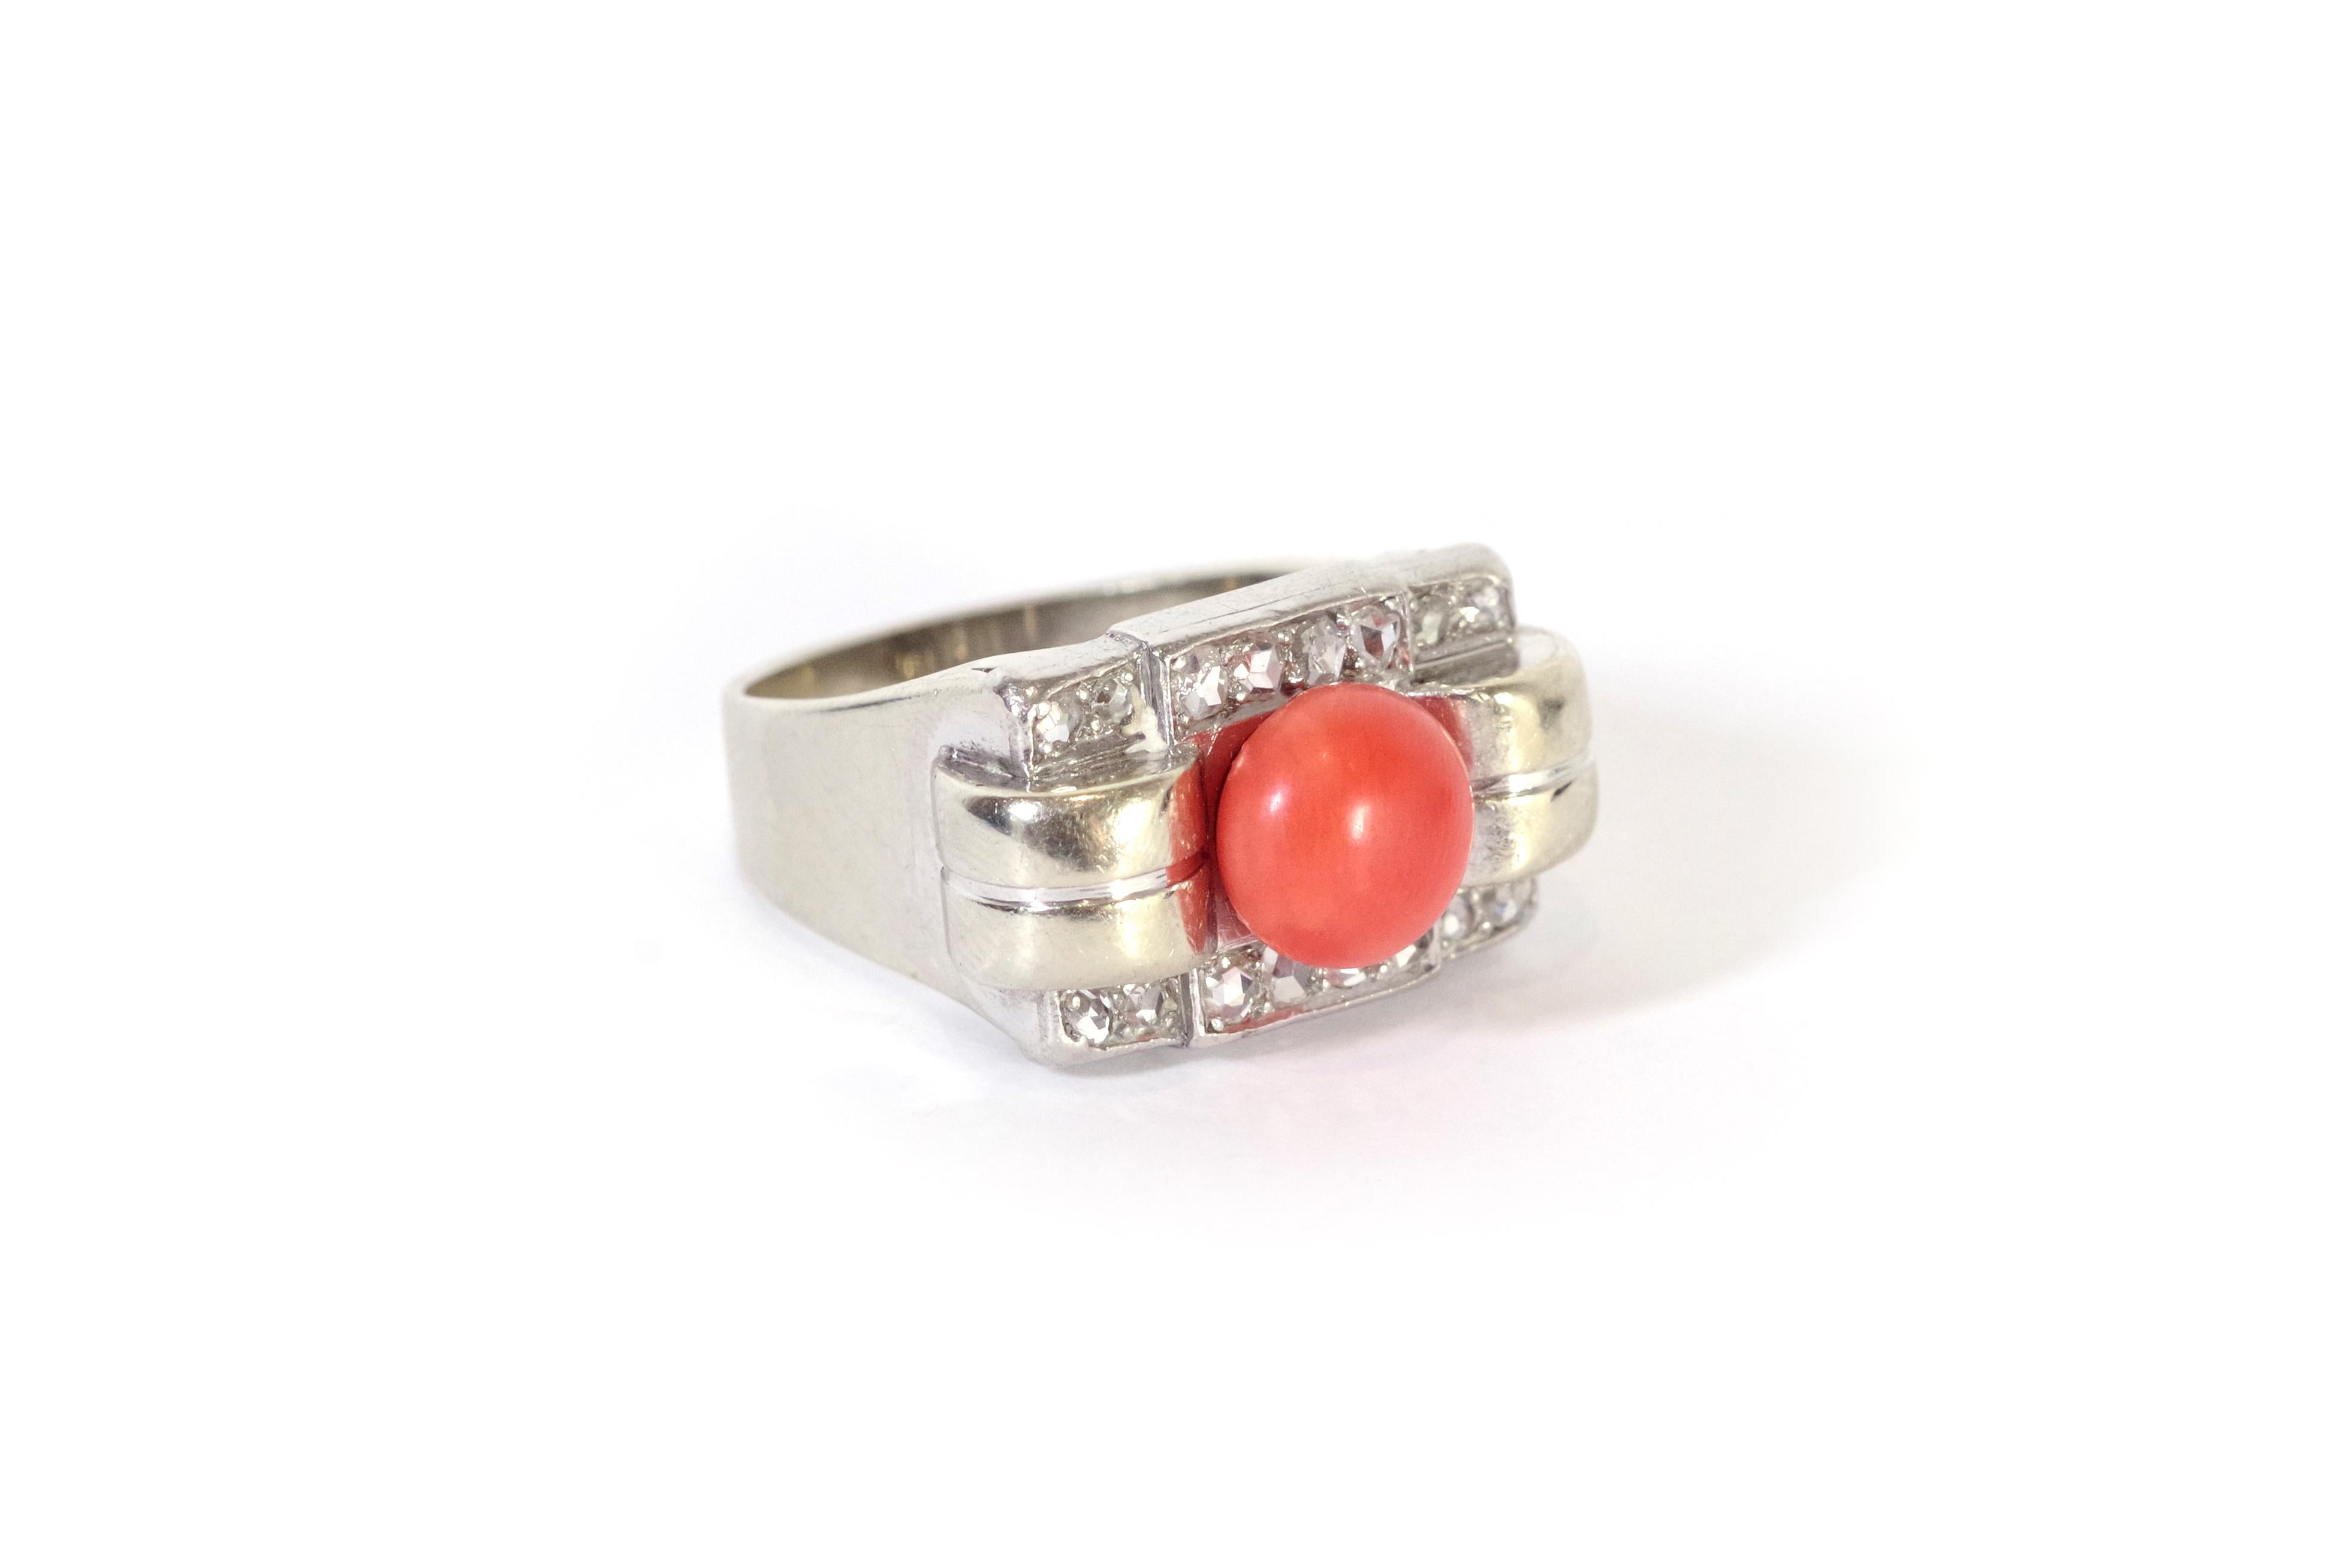 Tank coral diamond ring in 18 karat white gold and platinum. The ring is centred on an orange coral pearl surrounded by two rolls of gold and framed by two lines of eight rose-cut diamonds (sixteen in all). The jewellery features the geometric lines